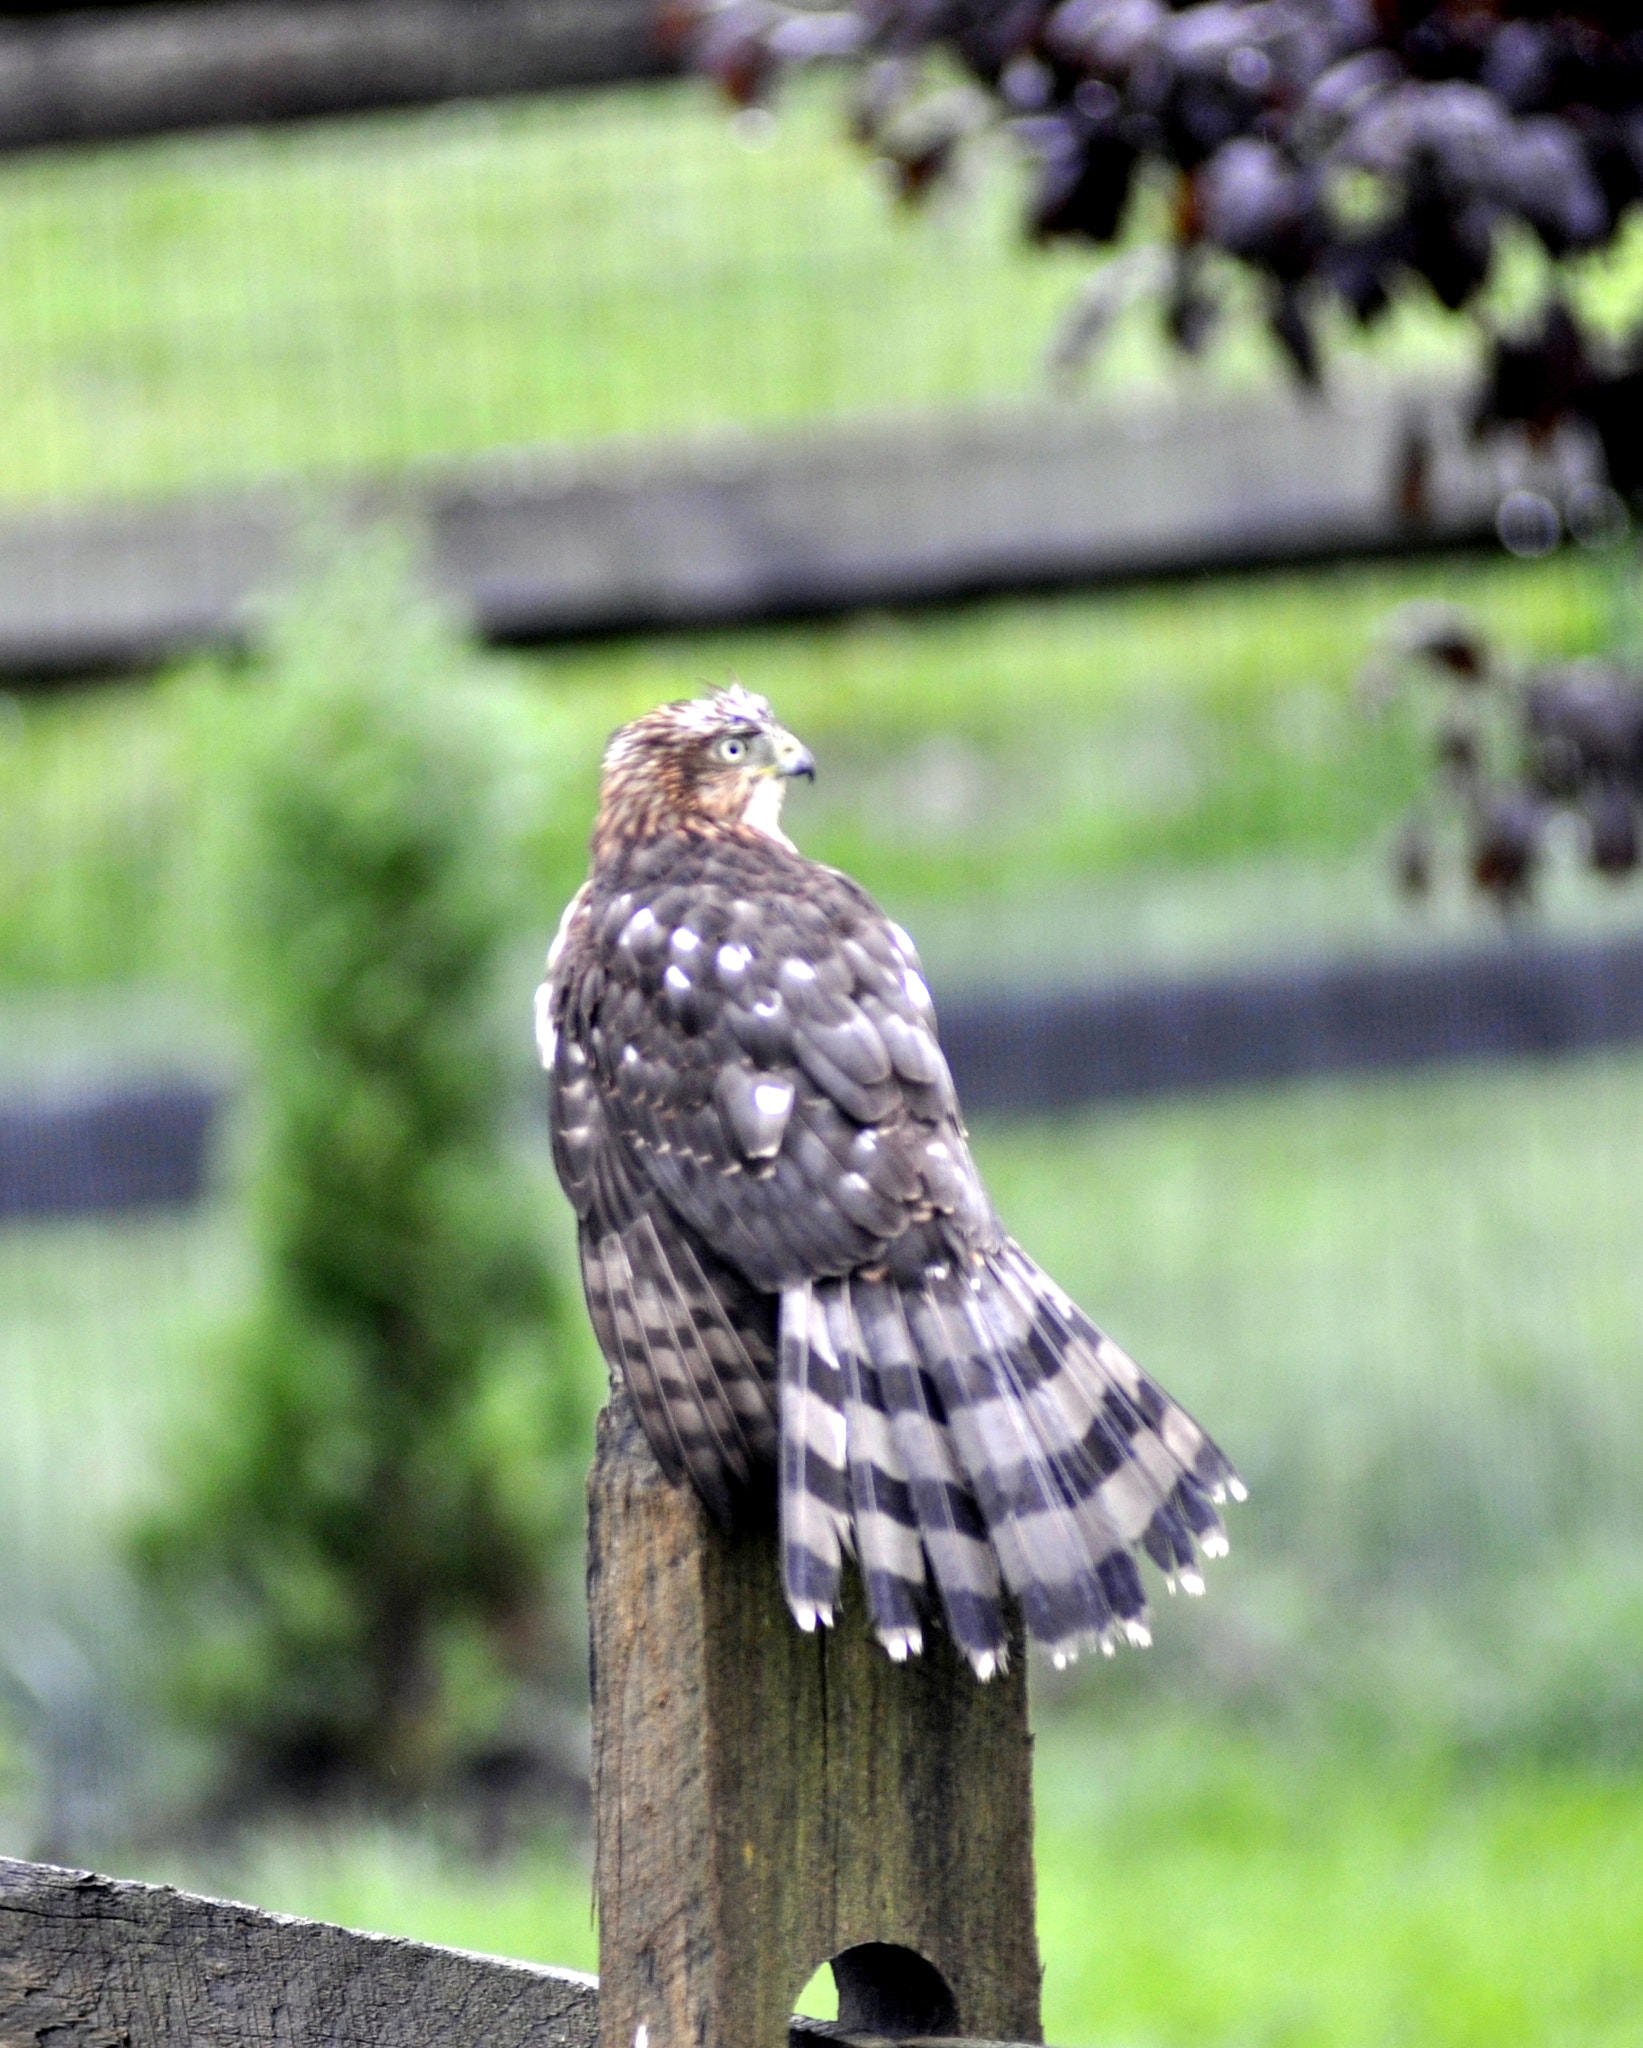 Nikon D90 sample photo. Brown tailed hawk fence sittin' early fall day sw oh - had to shoot the photo through the door glass photography